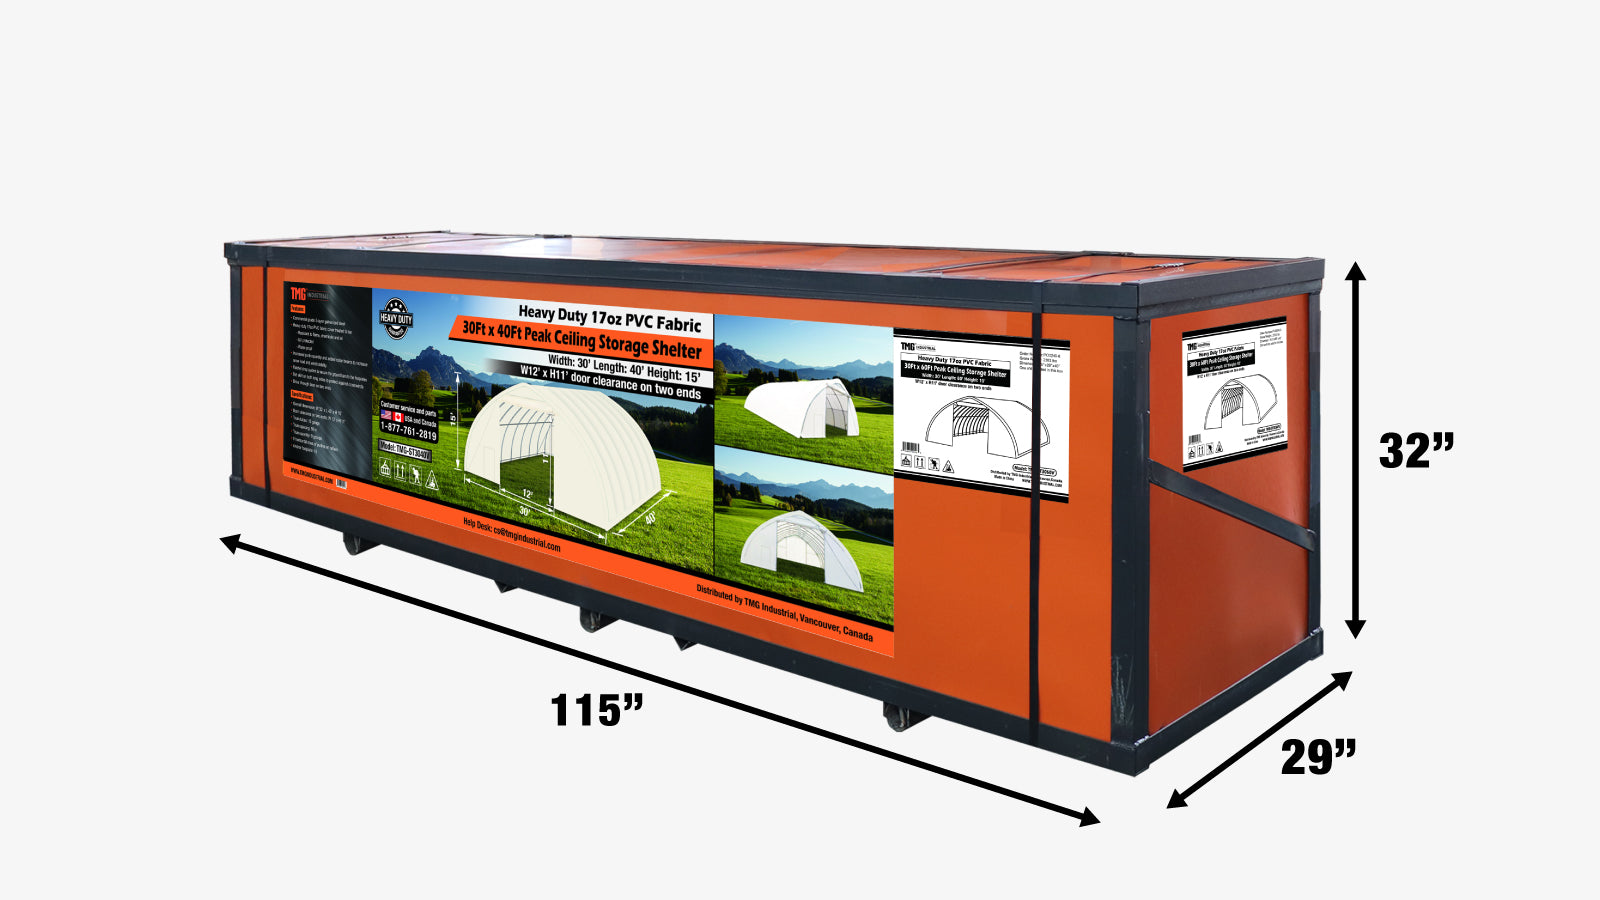 TMG Industrial 30' x 40' Peak Ceiling Storage Shelter with Heavy Duty 17 oz PVC Cover & Drive Through Doors, TMG-ST3040V-shipping-info-image